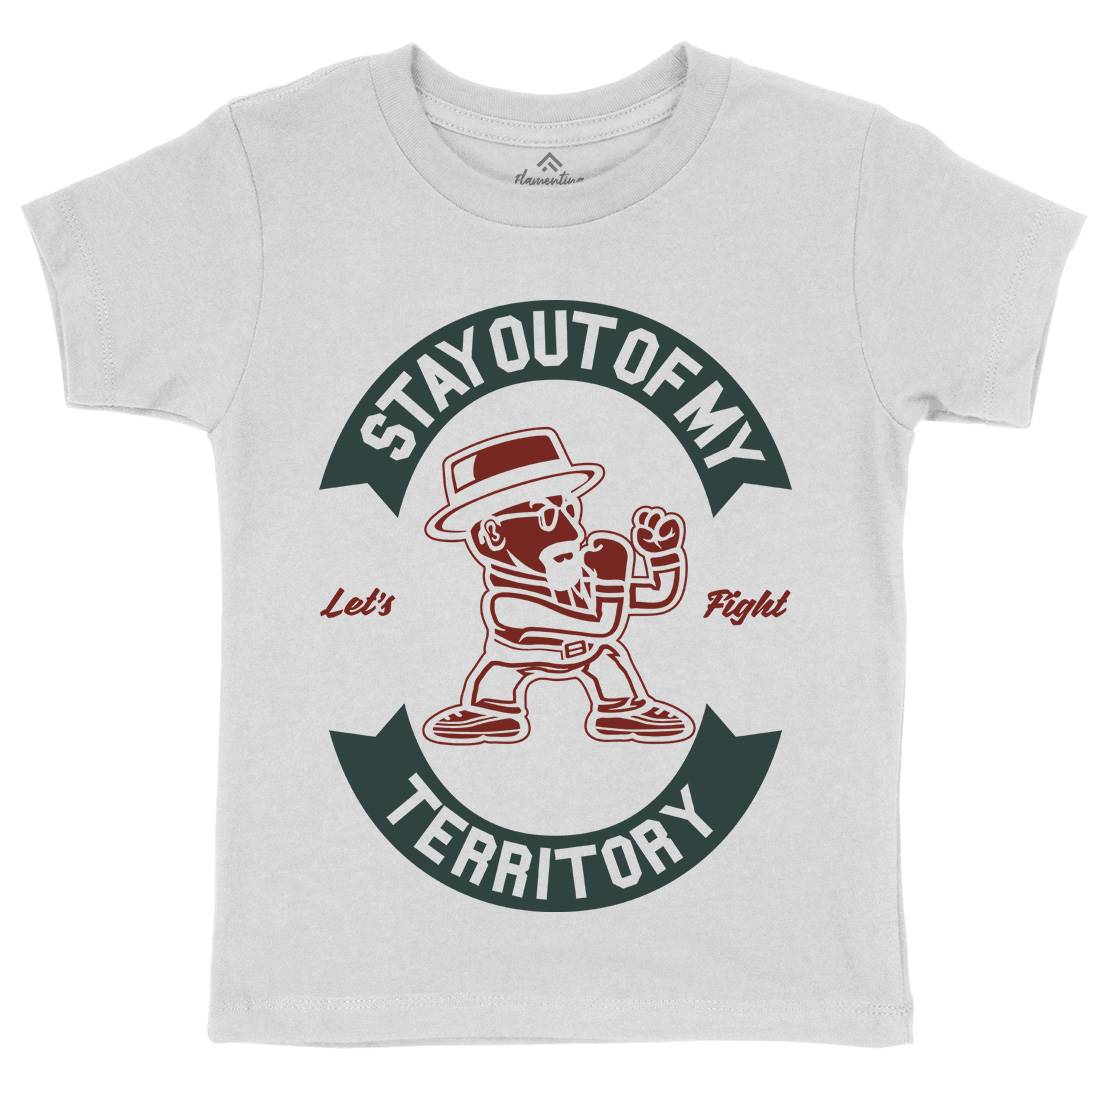 Stay Out Kids Crew Neck T-Shirt Retro A284